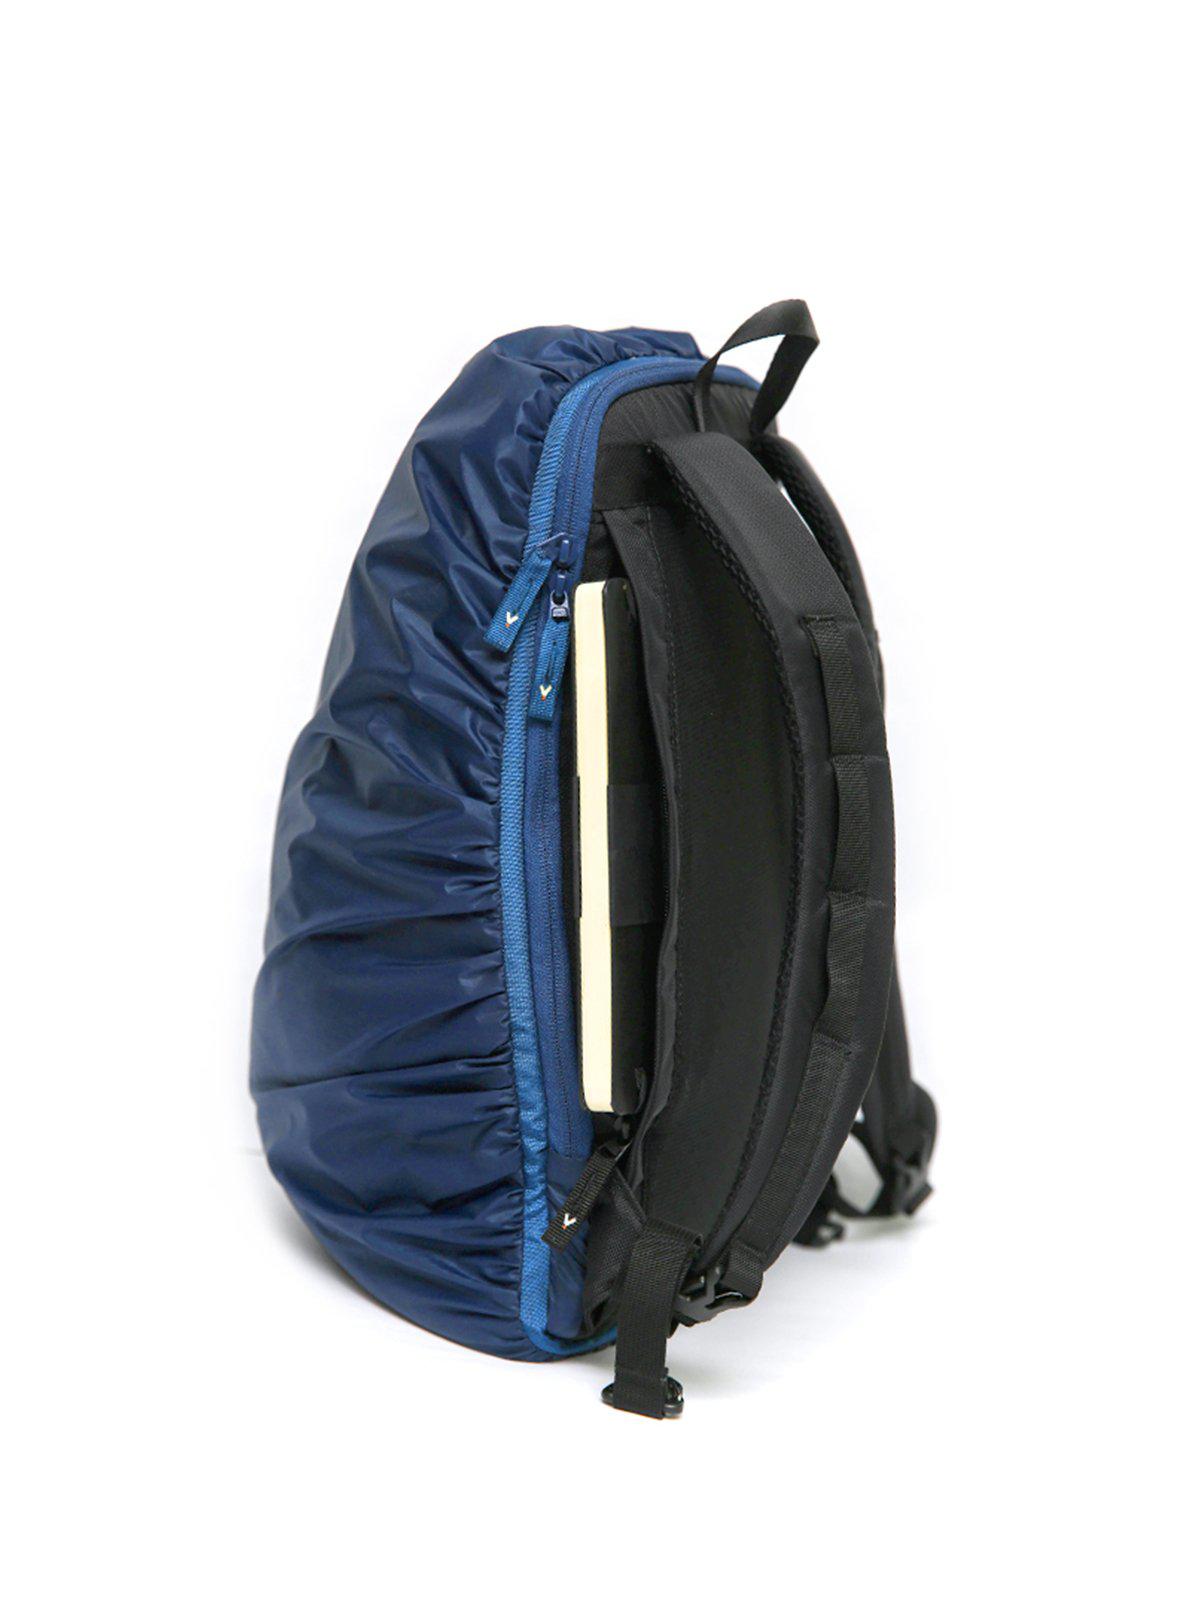 Outside Hilo Backpack Navy - MORE by Morello Indonesia